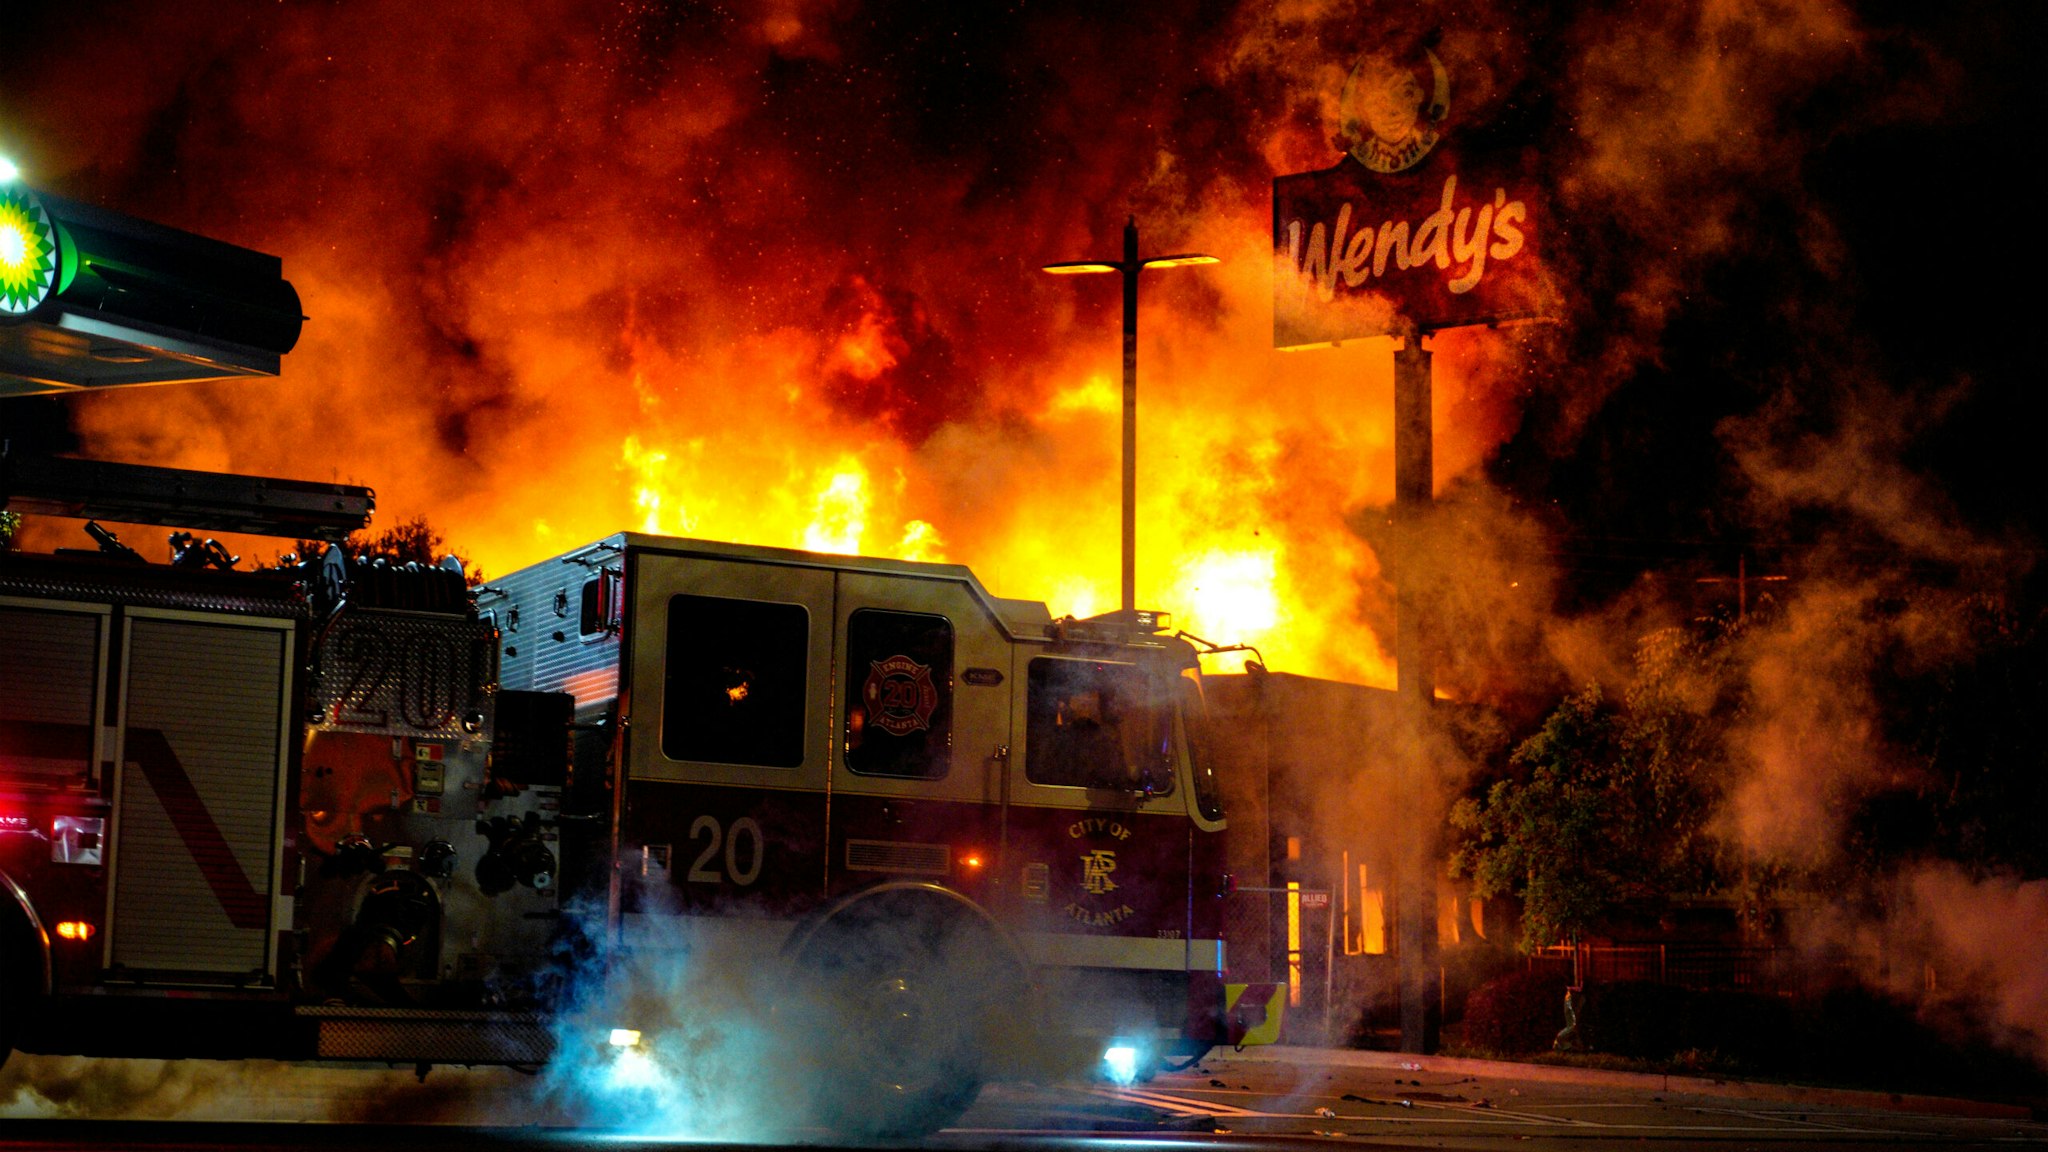 ATLANTA, USA - JUNE 13: Demonstrators set on fire a restaurant during the protest after an Atlanta police officer shot and killed Rayshard Brooks, 27, at a Wendy's fast food restaurant drive-thru Friday night in Atlanta, United States on June 13, 2020. As nationwide protests slowed in the death of George Floyd, anger again erupted Saturday in the US over the fatal shooting of another black man. Mayor Keisha Lance Bottoms announced Atlanta Police Chief Ericka Shields voluntarily stepped down from the department earlier in the day.